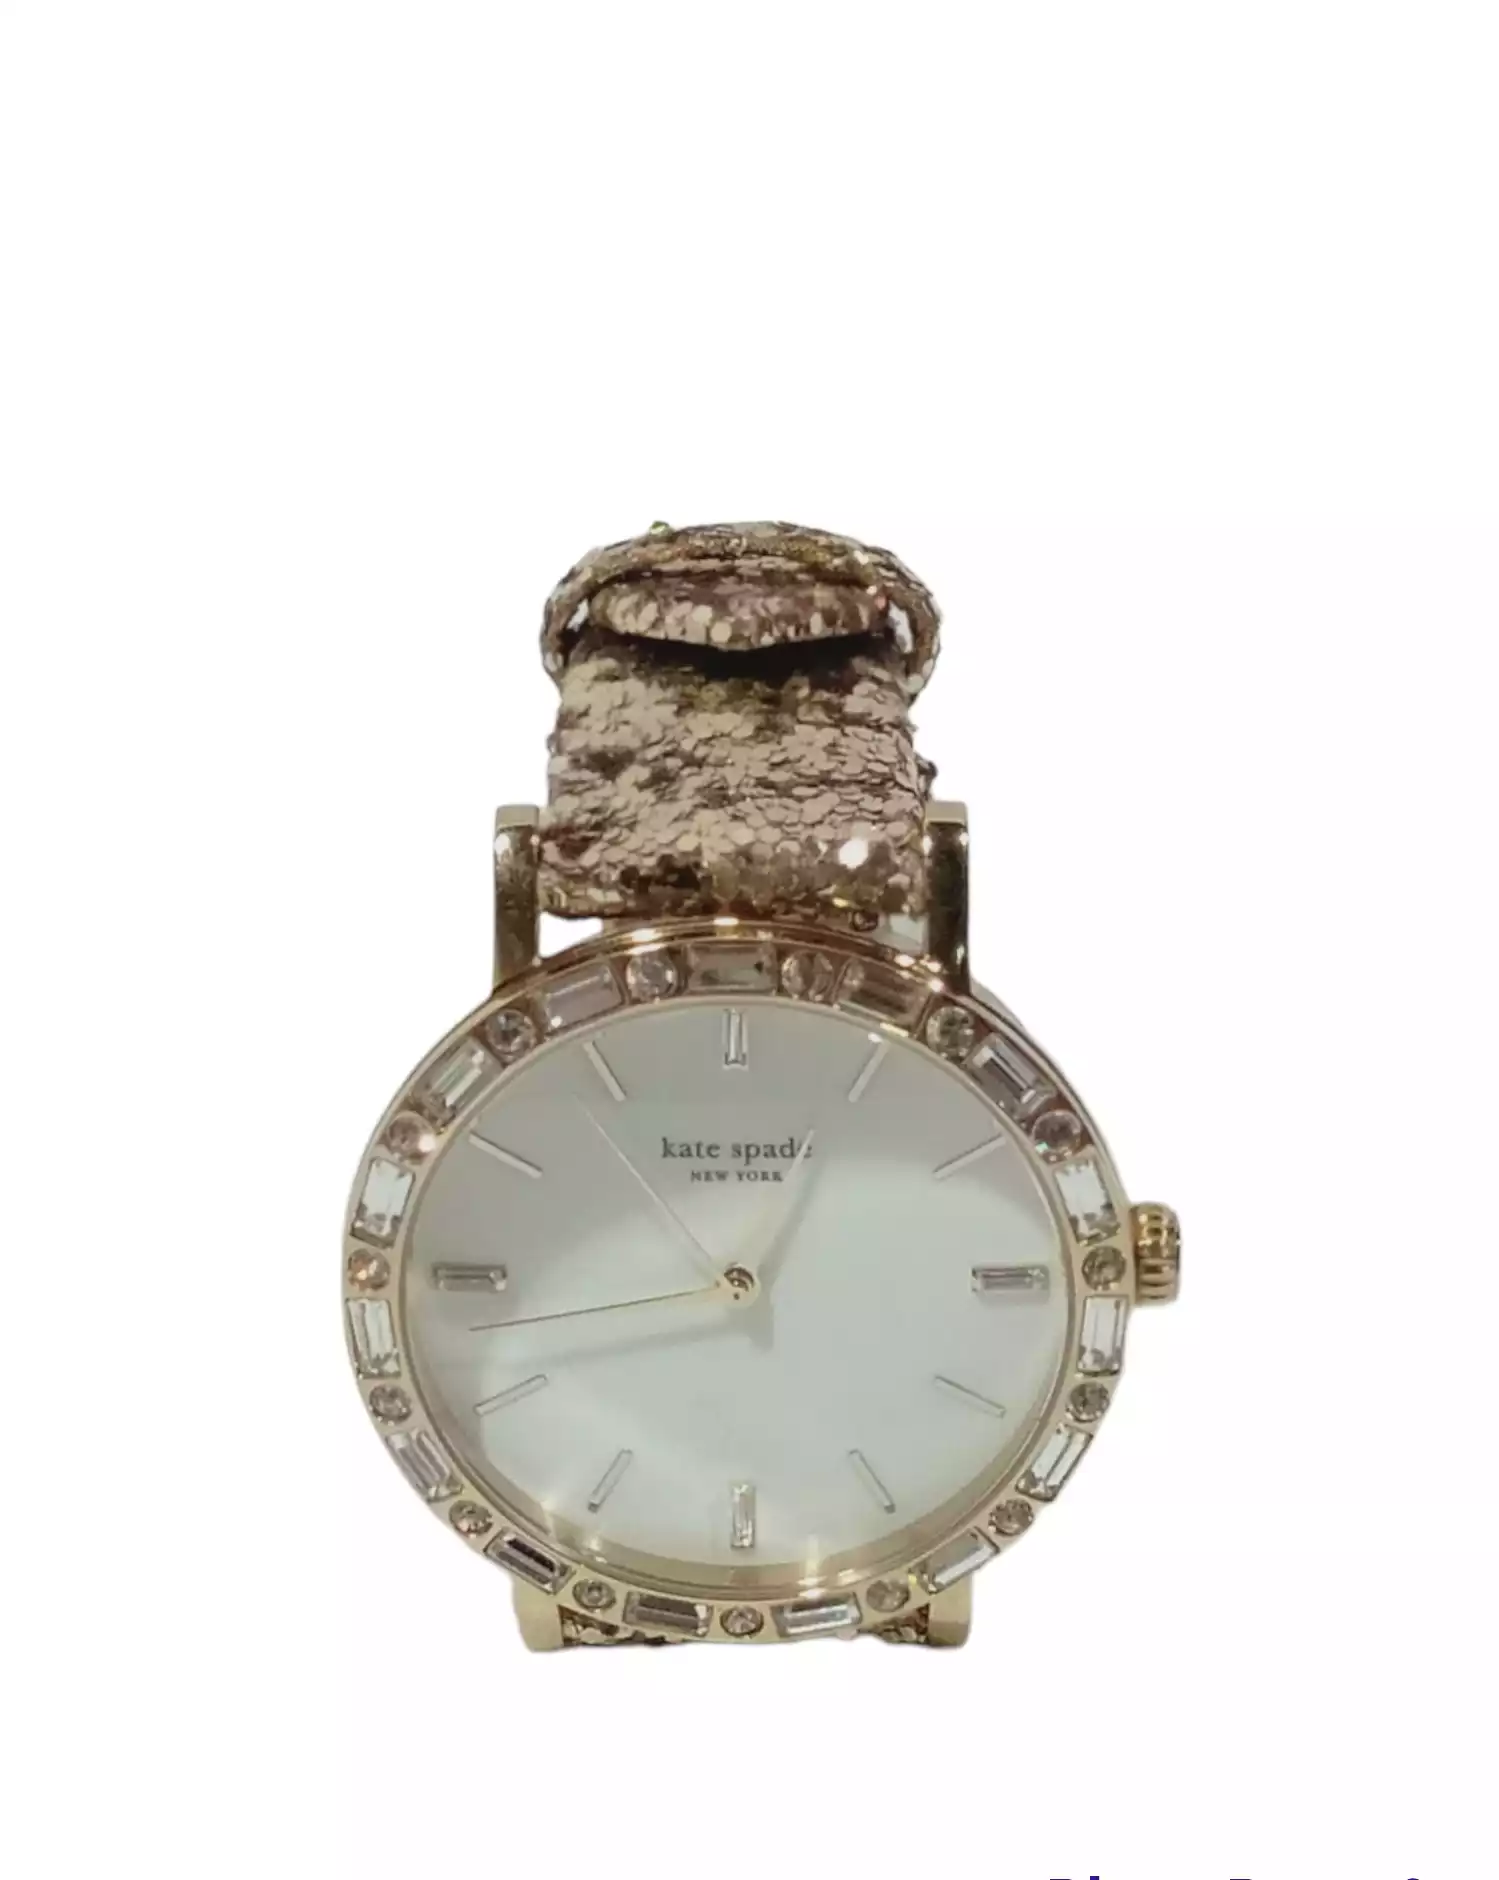 Watch by Kate Spade